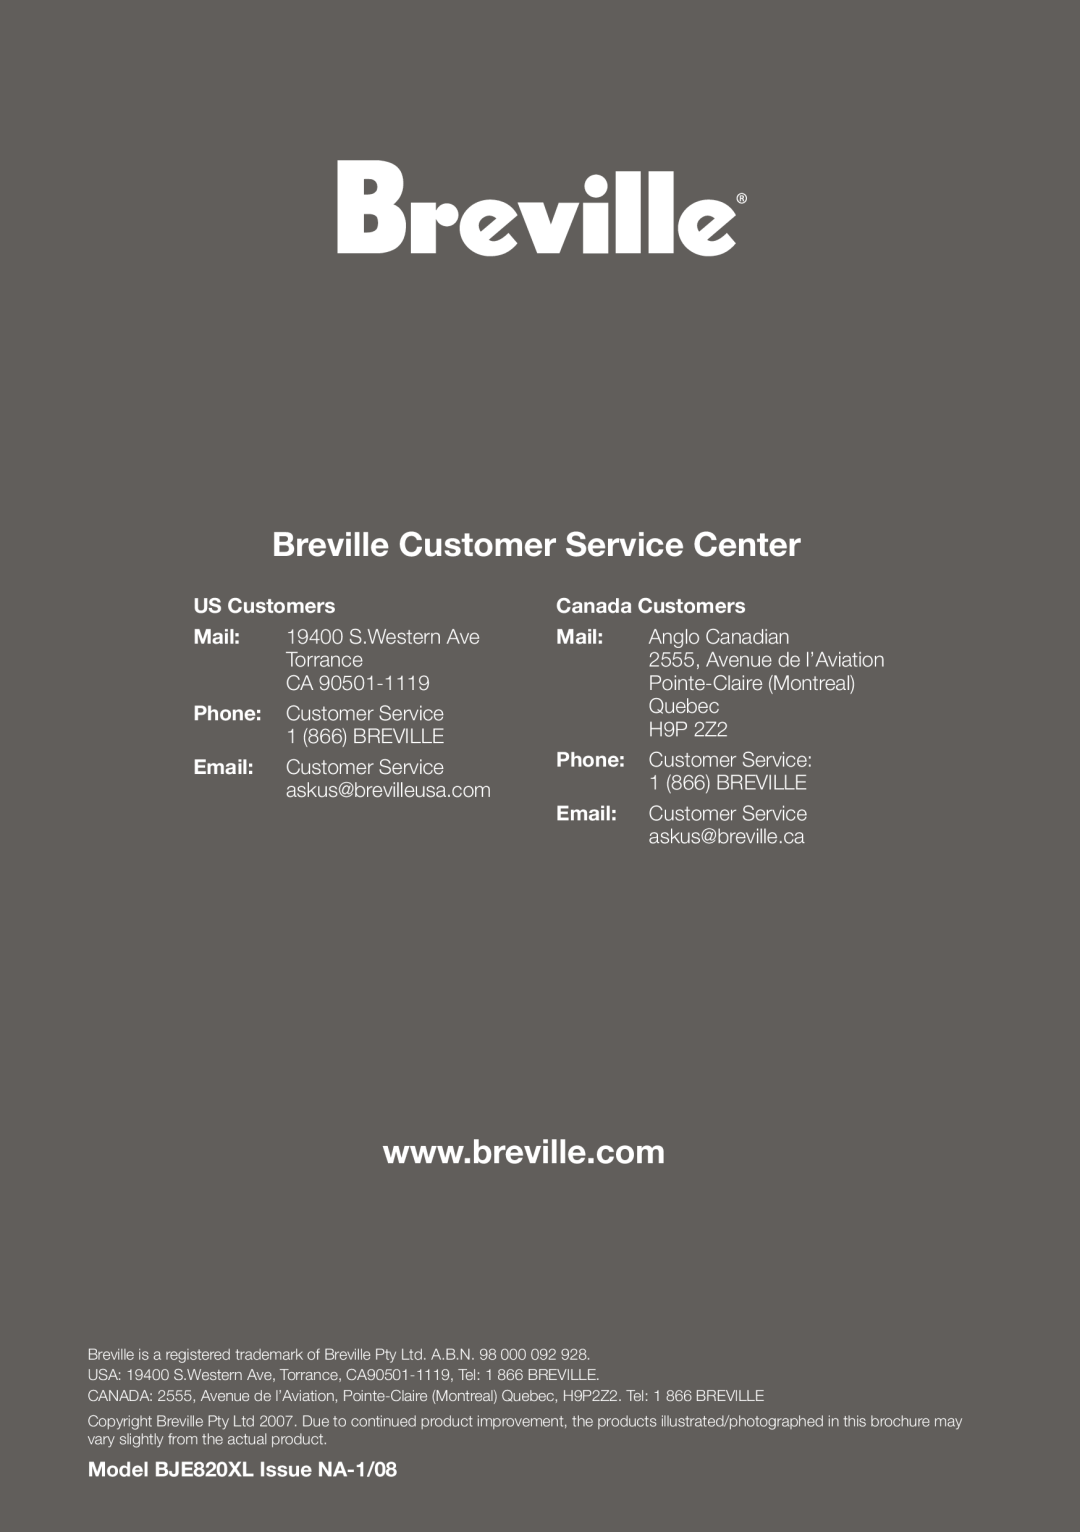 Breville manual Breville Customer Service Center, US Customers, Canada Customers, Model BJE820XL Issue NA-1/08 